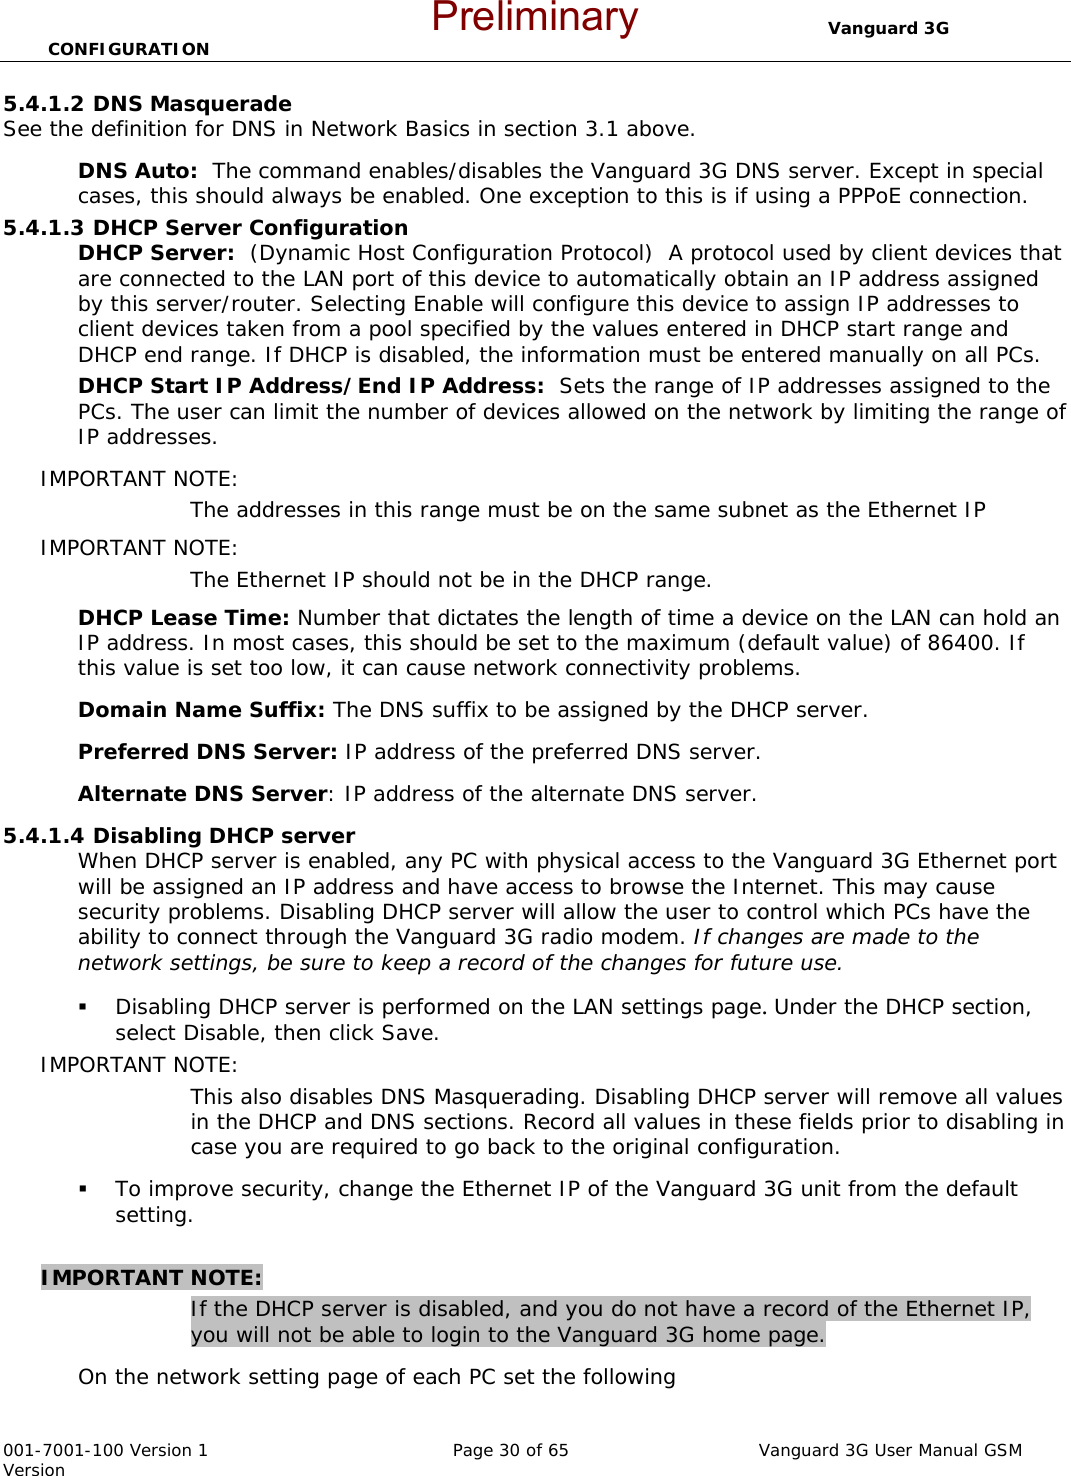                                  Vanguard 3G CONFIGURATION  001-7001-100 Version 1       Page 30 of 65       Vanguard 3G User Manual GSM Version 5.4.1.2 DNS Masquerade  See the definition for DNS in Network Basics in section 3.1 above. DNS Auto:  The command enables/disables the Vanguard 3G DNS server. Except in special cases, this should always be enabled. One exception to this is if using a PPPoE connection.   5.4.1.3 DHCP Server Configuration DHCP Server:  (Dynamic Host Configuration Protocol)  A protocol used by client devices that are connected to the LAN port of this device to automatically obtain an IP address assigned by this server/router. Selecting Enable will configure this device to assign IP addresses to client devices taken from a pool specified by the values entered in DHCP start range and DHCP end range. If DHCP is disabled, the information must be entered manually on all PCs.   DHCP Start IP Address/End IP Address:  Sets the range of IP addresses assigned to the PCs. The user can limit the number of devices allowed on the network by limiting the range of IP addresses.   IMPORTANT NOTE:   The addresses in this range must be on the same subnet as the Ethernet IP IMPORTANT NOTE:   The Ethernet IP should not be in the DHCP range.   DHCP Lease Time: Number that dictates the length of time a device on the LAN can hold an IP address. In most cases, this should be set to the maximum (default value) of 86400. If this value is set too low, it can cause network connectivity problems.  Domain Name Suffix: The DNS suffix to be assigned by the DHCP server.  Preferred DNS Server: IP address of the preferred DNS server. Alternate DNS Server: IP address of the alternate DNS server. 5.4.1.4 Disabling DHCP server When DHCP server is enabled, any PC with physical access to the Vanguard 3G Ethernet port will be assigned an IP address and have access to browse the Internet. This may cause security problems. Disabling DHCP server will allow the user to control which PCs have the ability to connect through the Vanguard 3G radio modem. If changes are made to the network settings, be sure to keep a record of the changes for future use.  Disabling DHCP server is performed on the LAN settings page. Under the DHCP section, select Disable, then click Save.   IMPORTANT NOTE:   This also disables DNS Masquerading. Disabling DHCP server will remove all values in the DHCP and DNS sections. Record all values in these fields prior to disabling in case you are required to go back to the original configuration.    To improve security, change the Ethernet IP of the Vanguard 3G unit from the default setting.    IMPORTANT NOTE:  If the DHCP server is disabled, and you do not have a record of the Ethernet IP, you will not be able to login to the Vanguard 3G home page.   On the network setting page of each PC set the following Preliminary